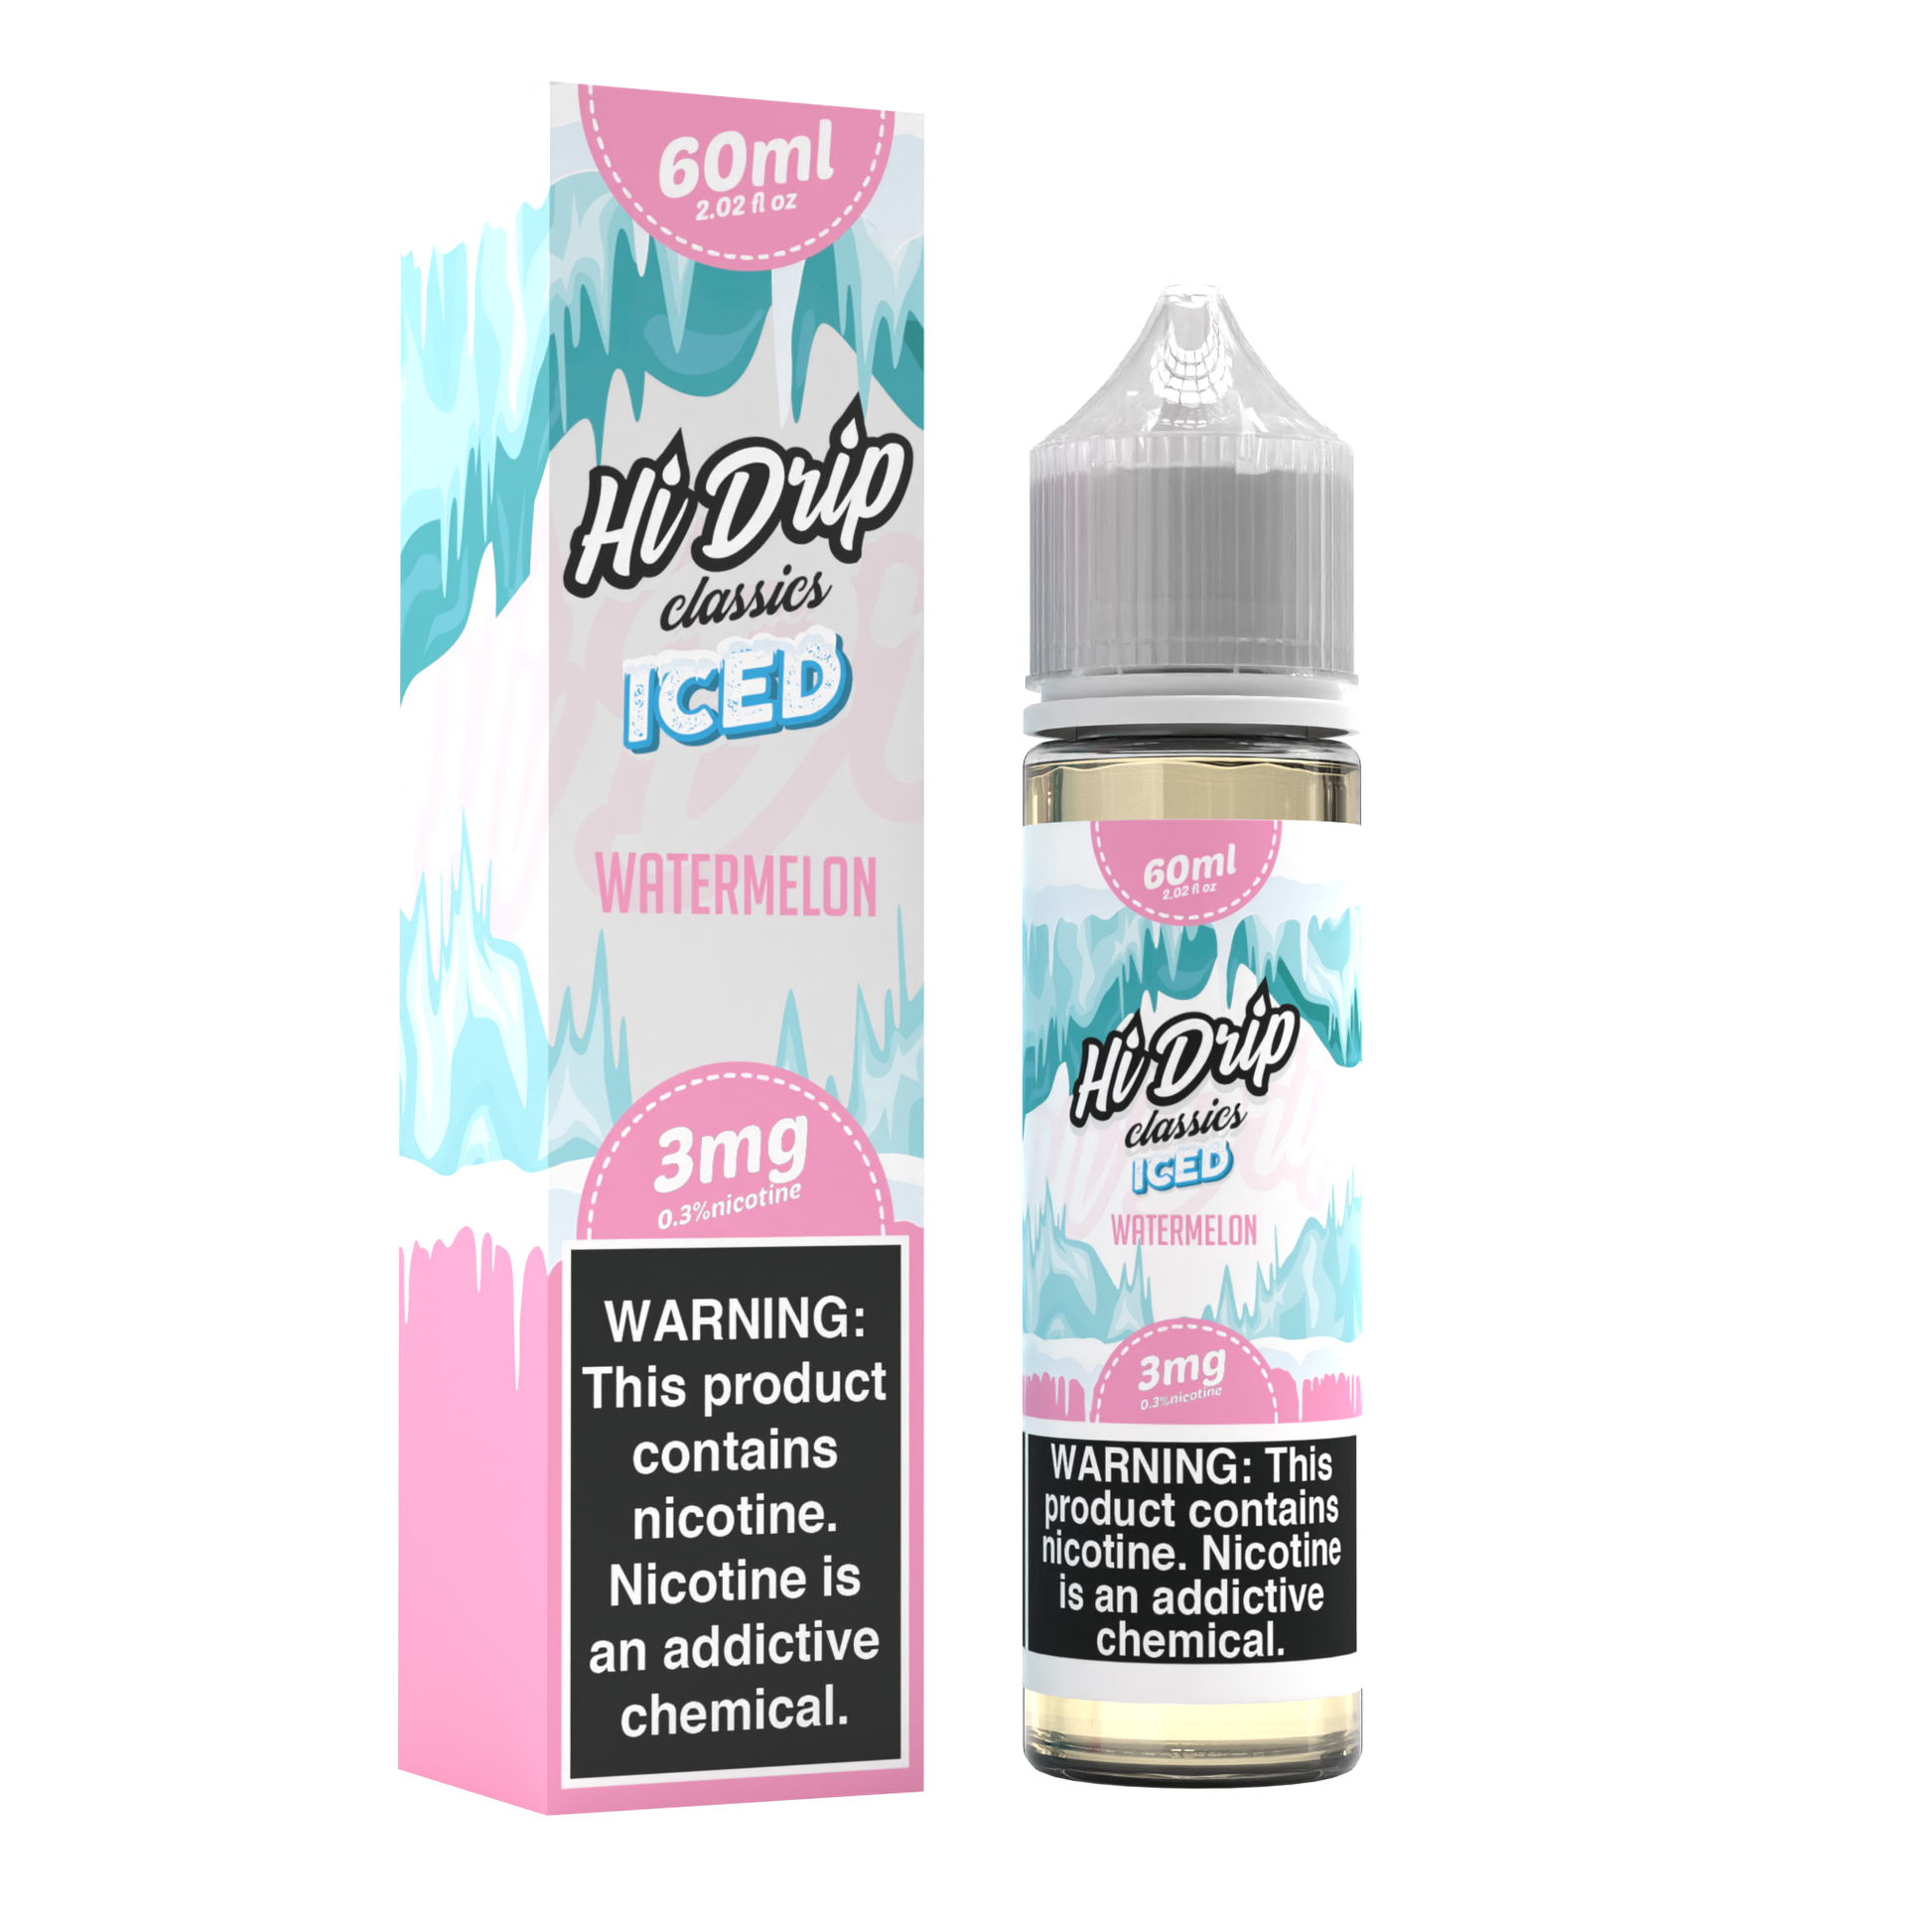 Watermelon Iced by Hi-Drip Classics Series 60mL with Packaging